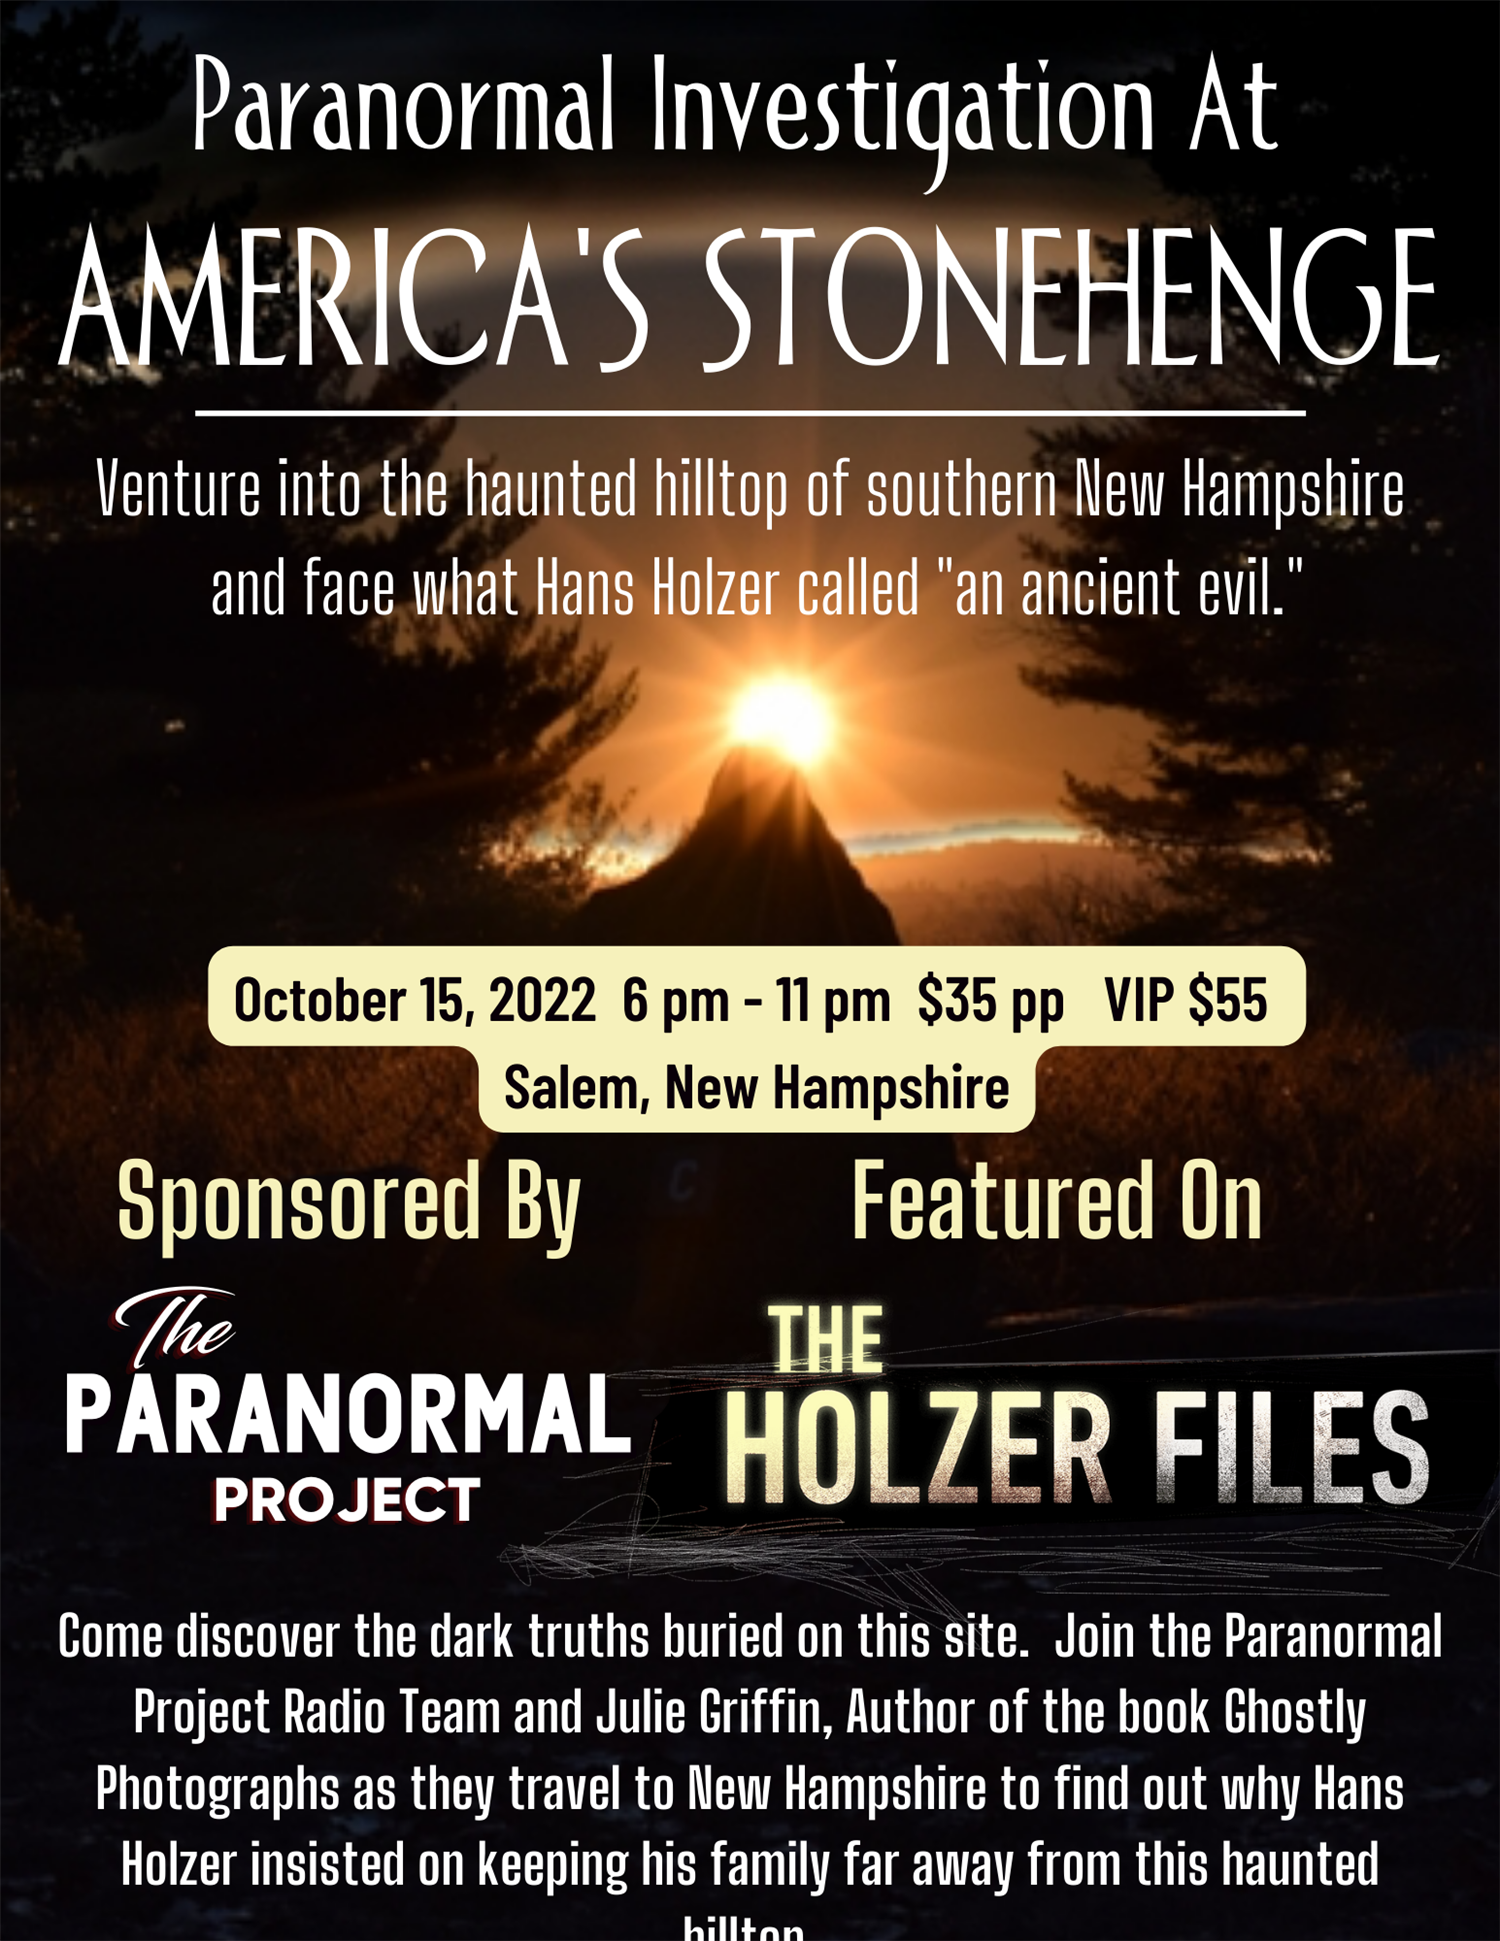 Investigate America's Stonehenge As Seen On The Holzer Files on Oct 15, 18:00@America's Stonehenge - Buy tickets and Get information on Thriller Events thriller.events